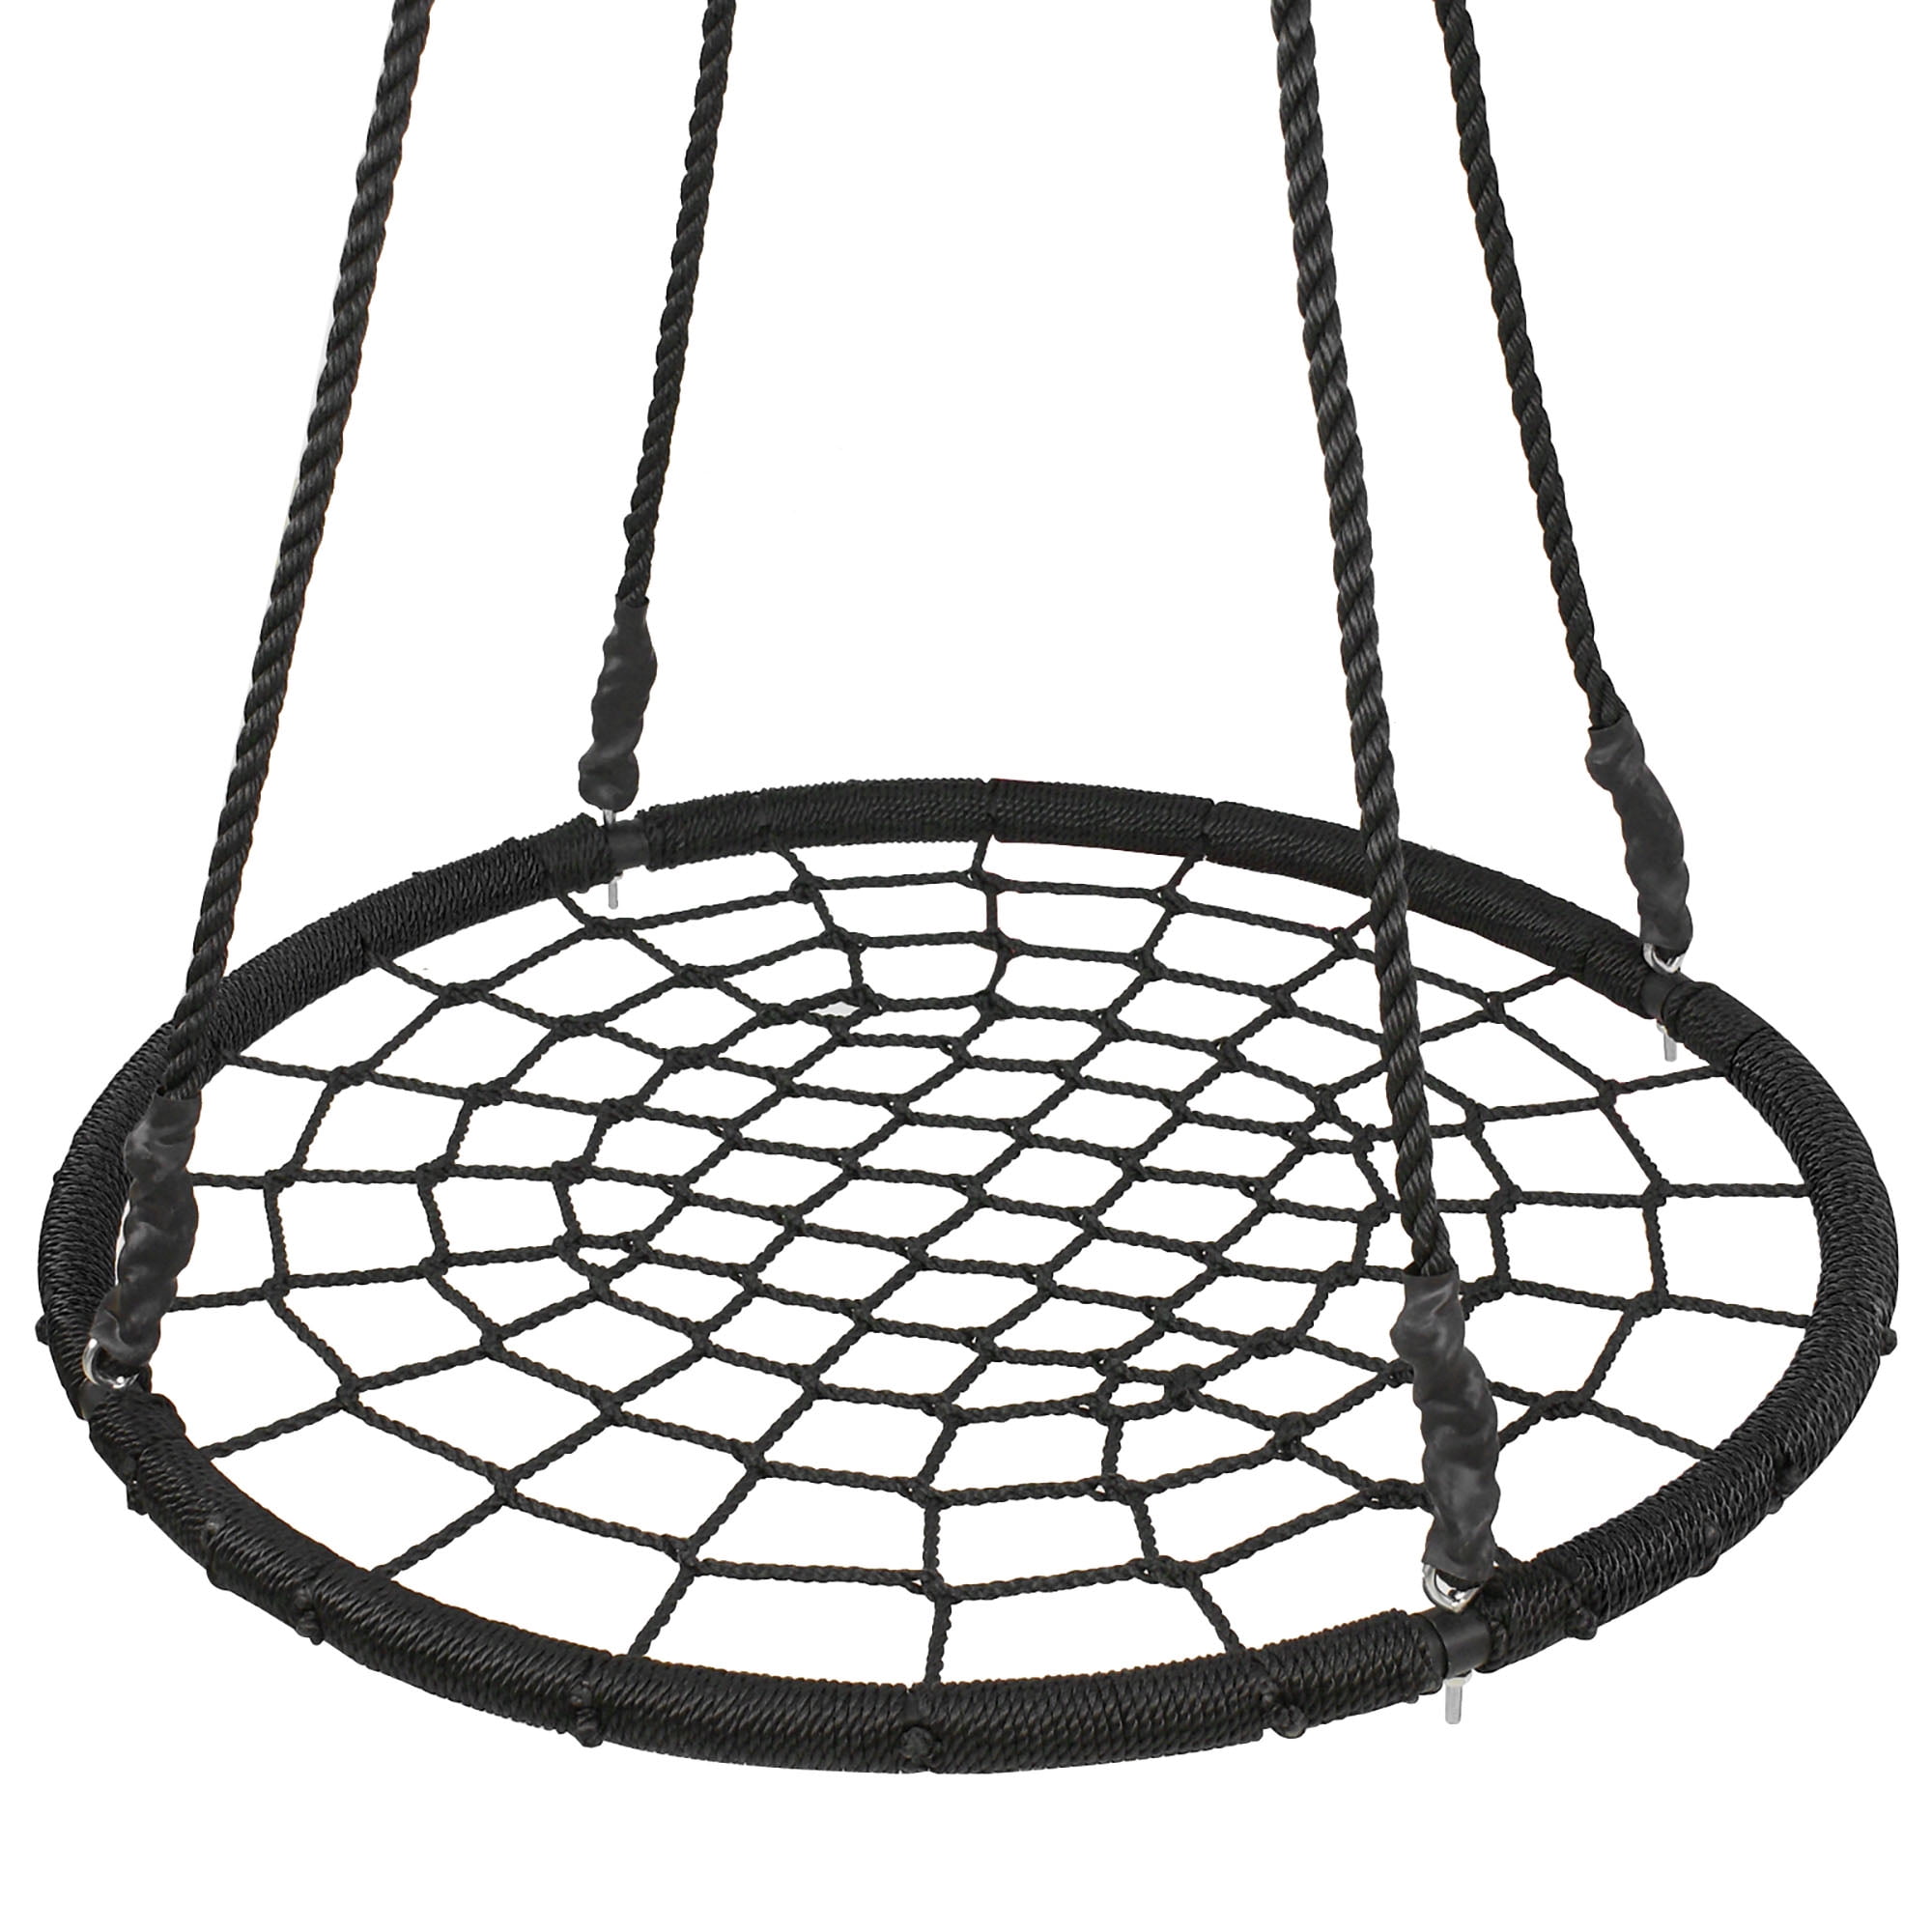 40" Round Tire Spider Web Tree Net Swing with Adjustable Rope Garden Playards 